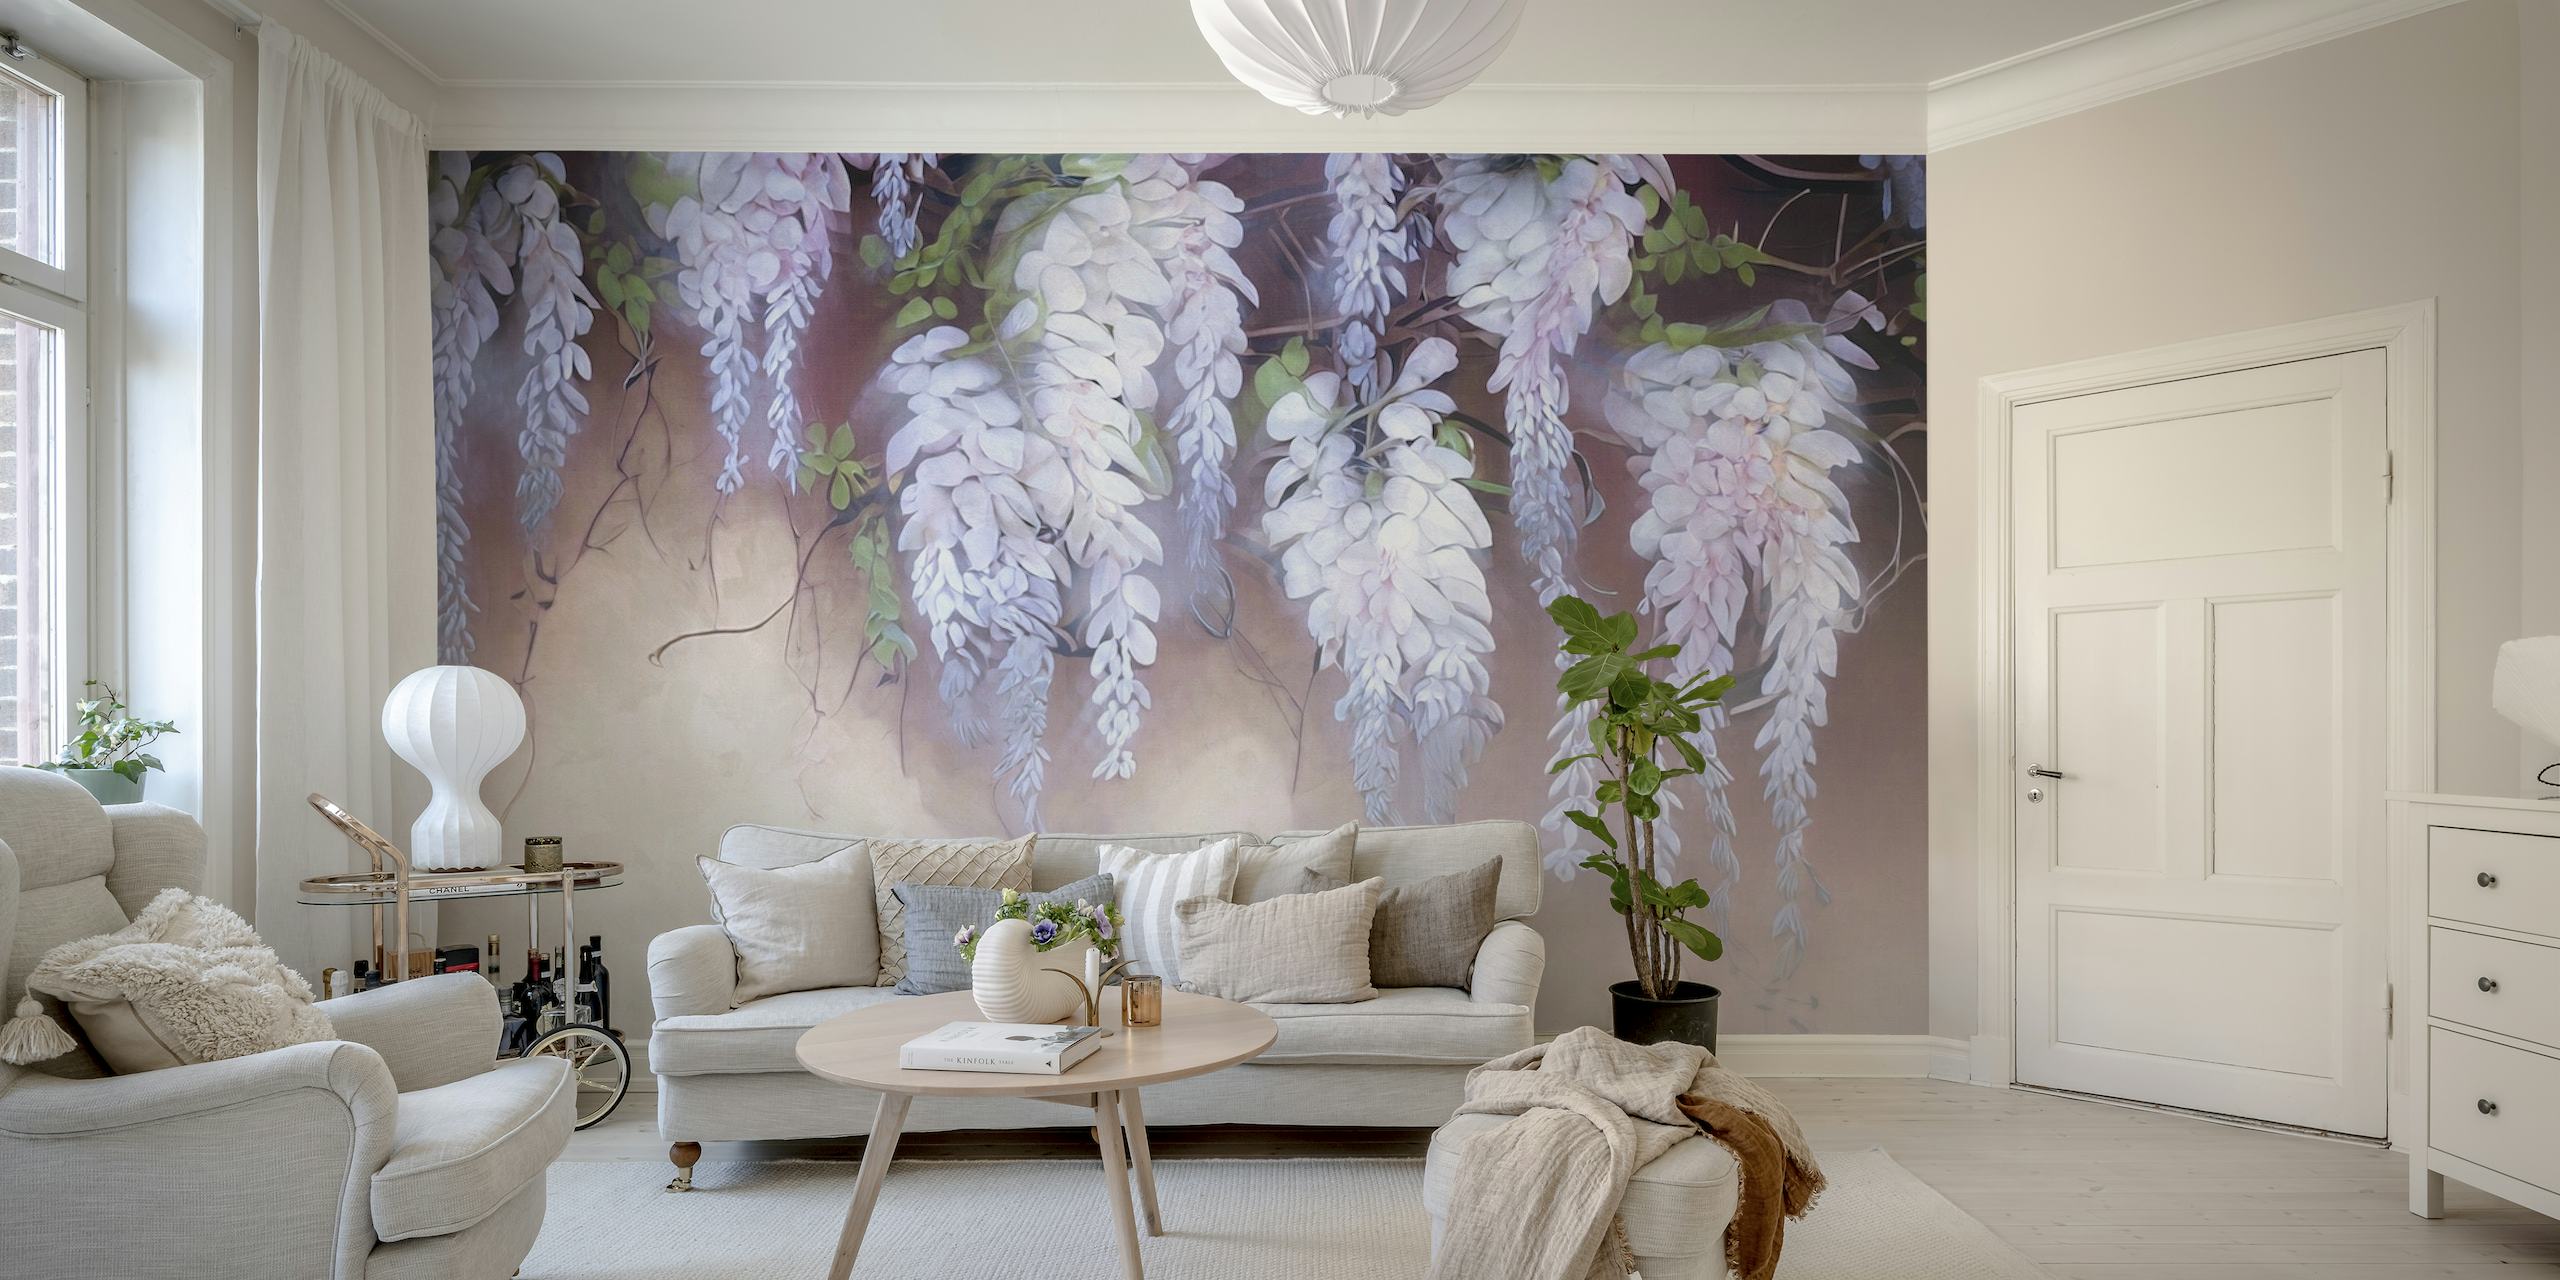 Floral wisteria wall behang